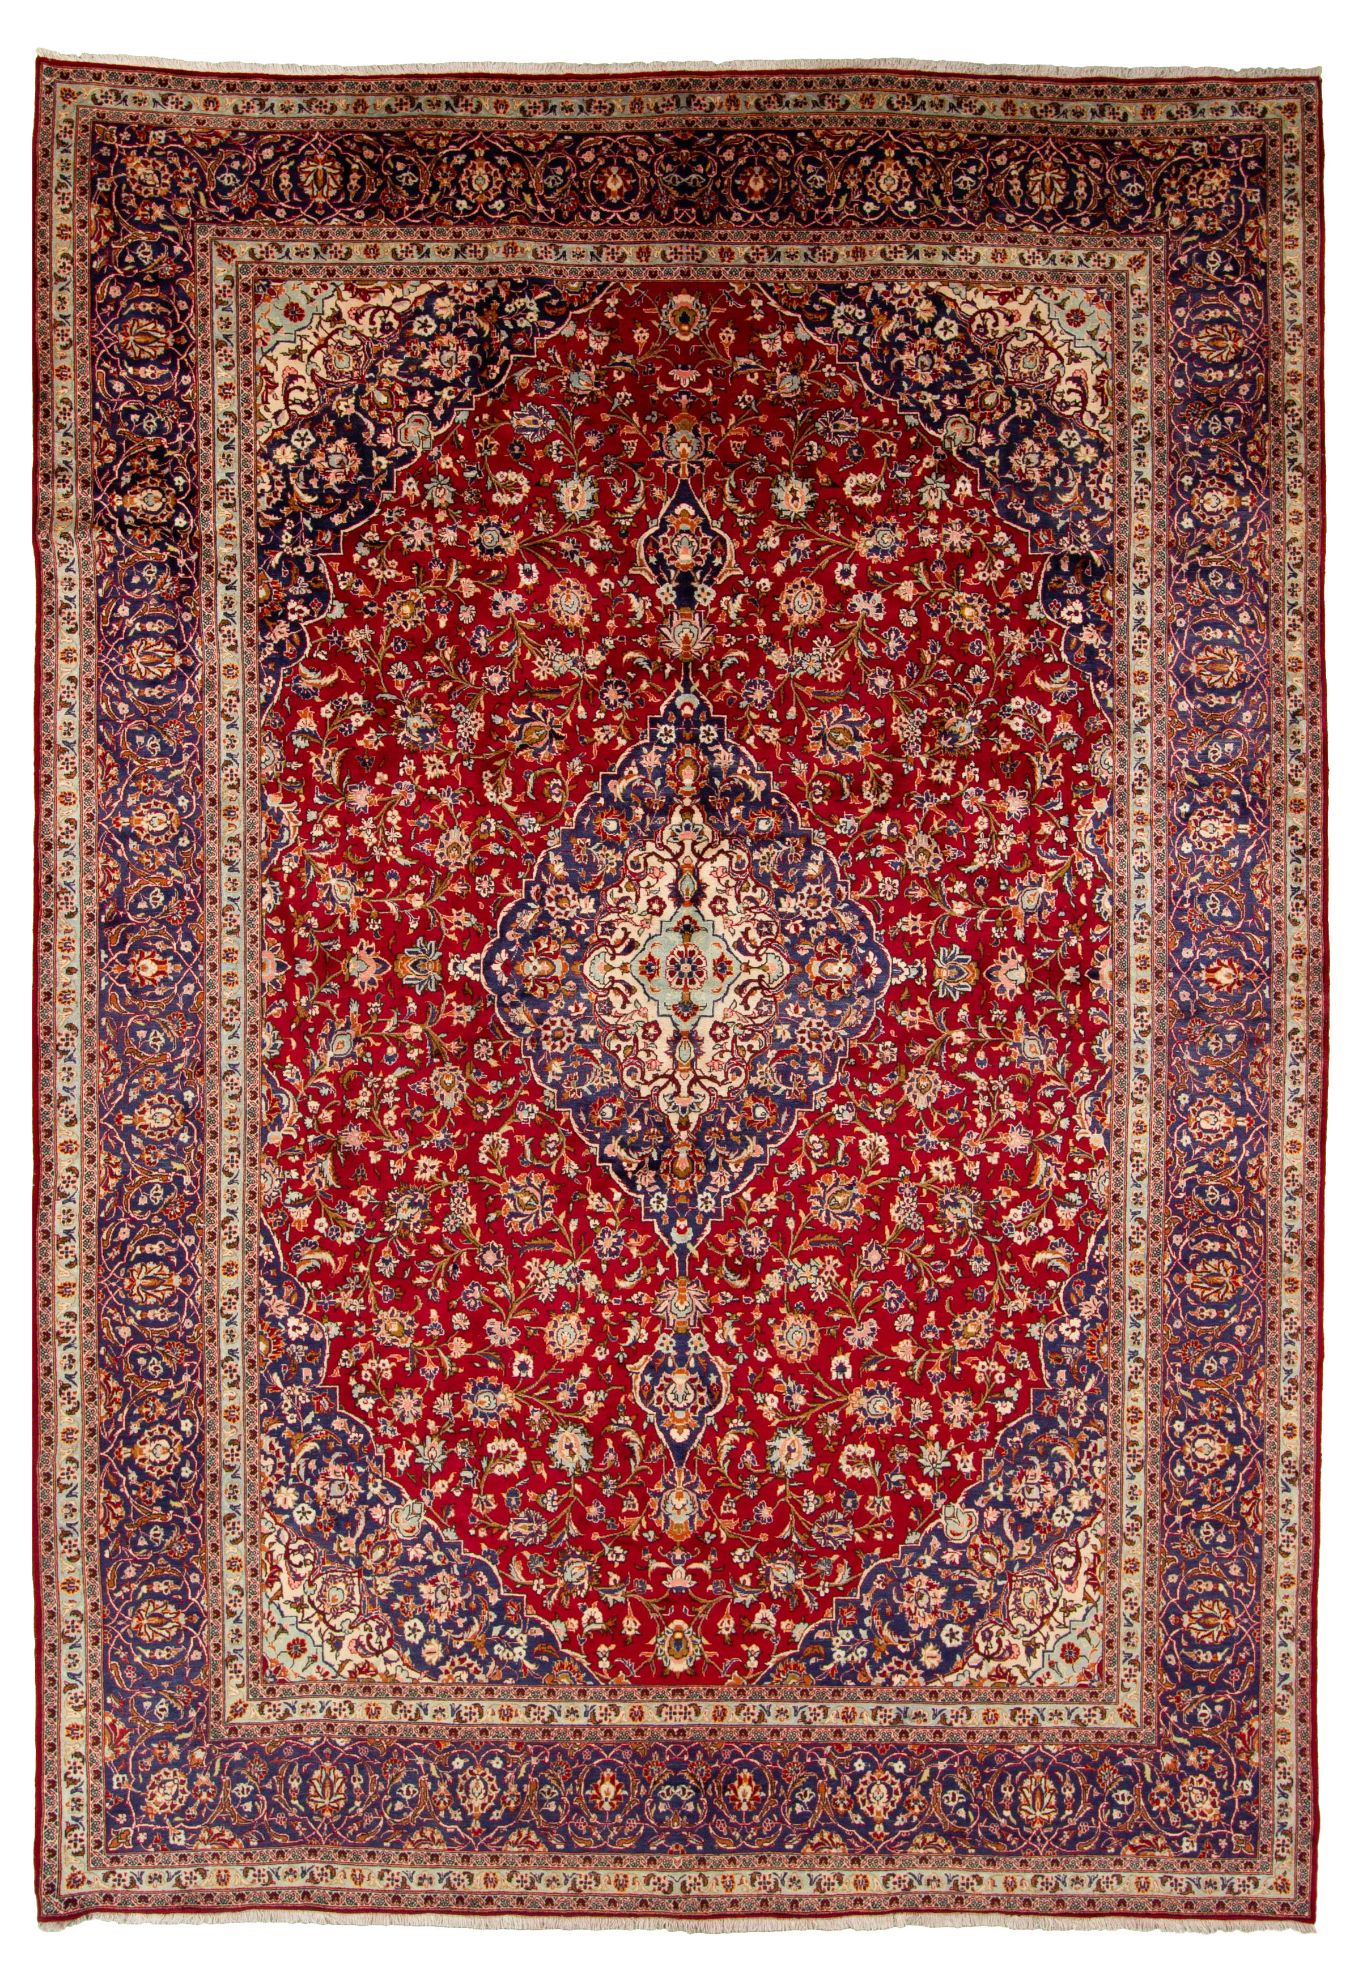 Hand-knotted>Iran>Kashan  Size: 9'10" x 14'4"  